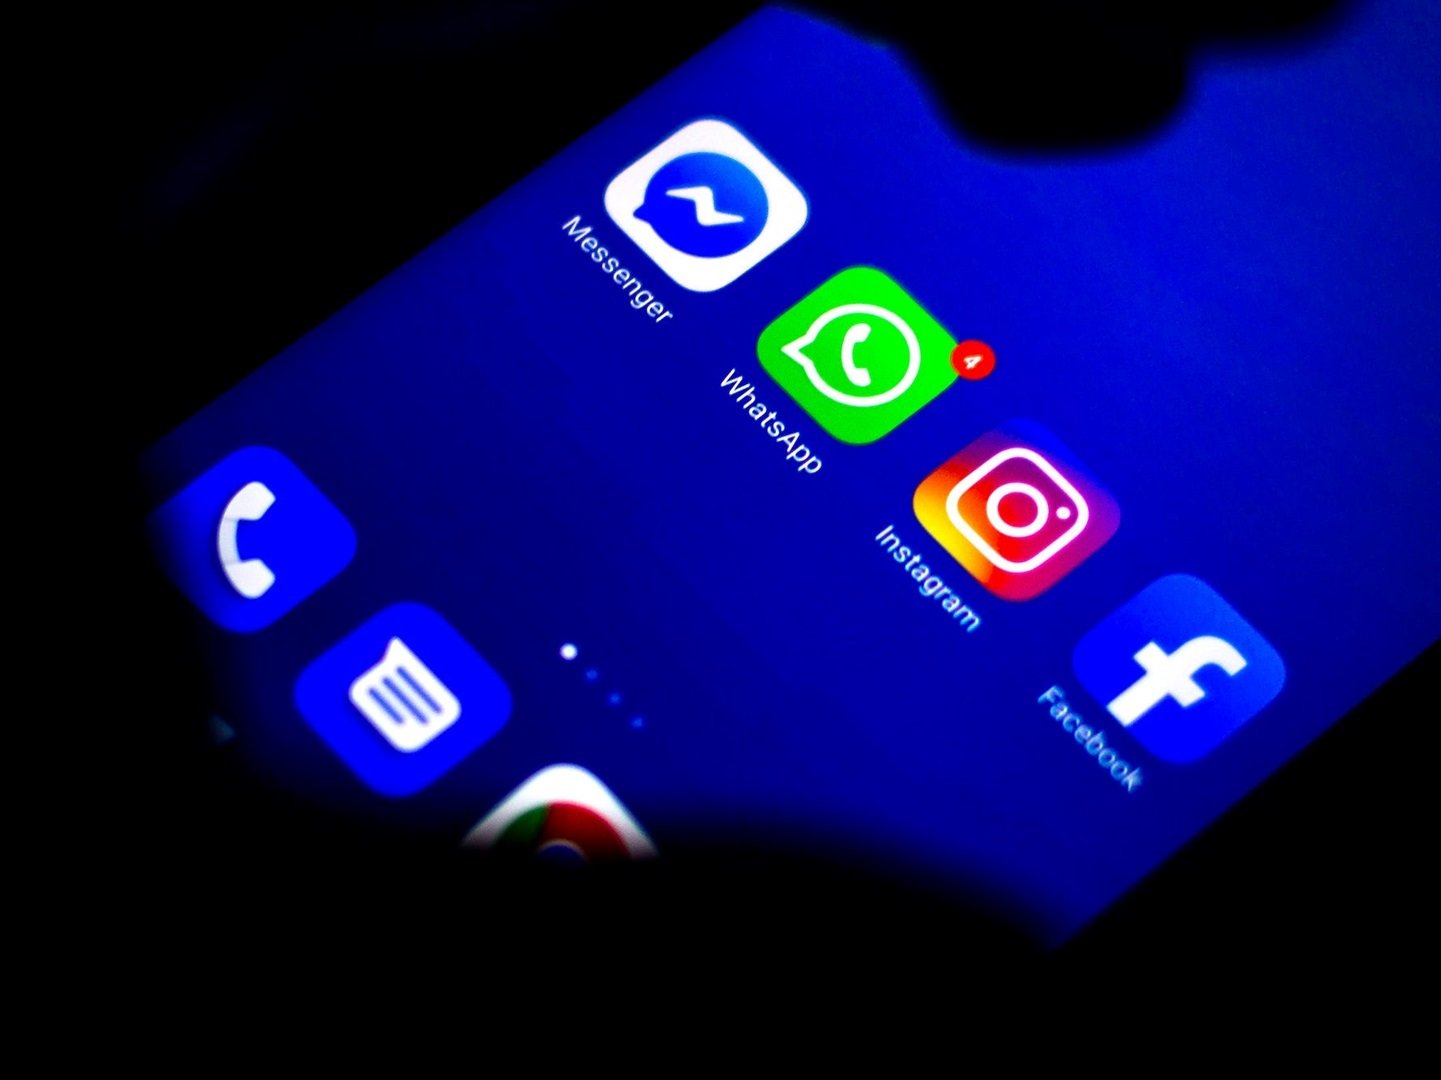 Secret algorithms and data privacy by big tech platforms have hurt the South African news media, the Competition Commission heard on Monday. (Rafael Henrique/Getty Images)